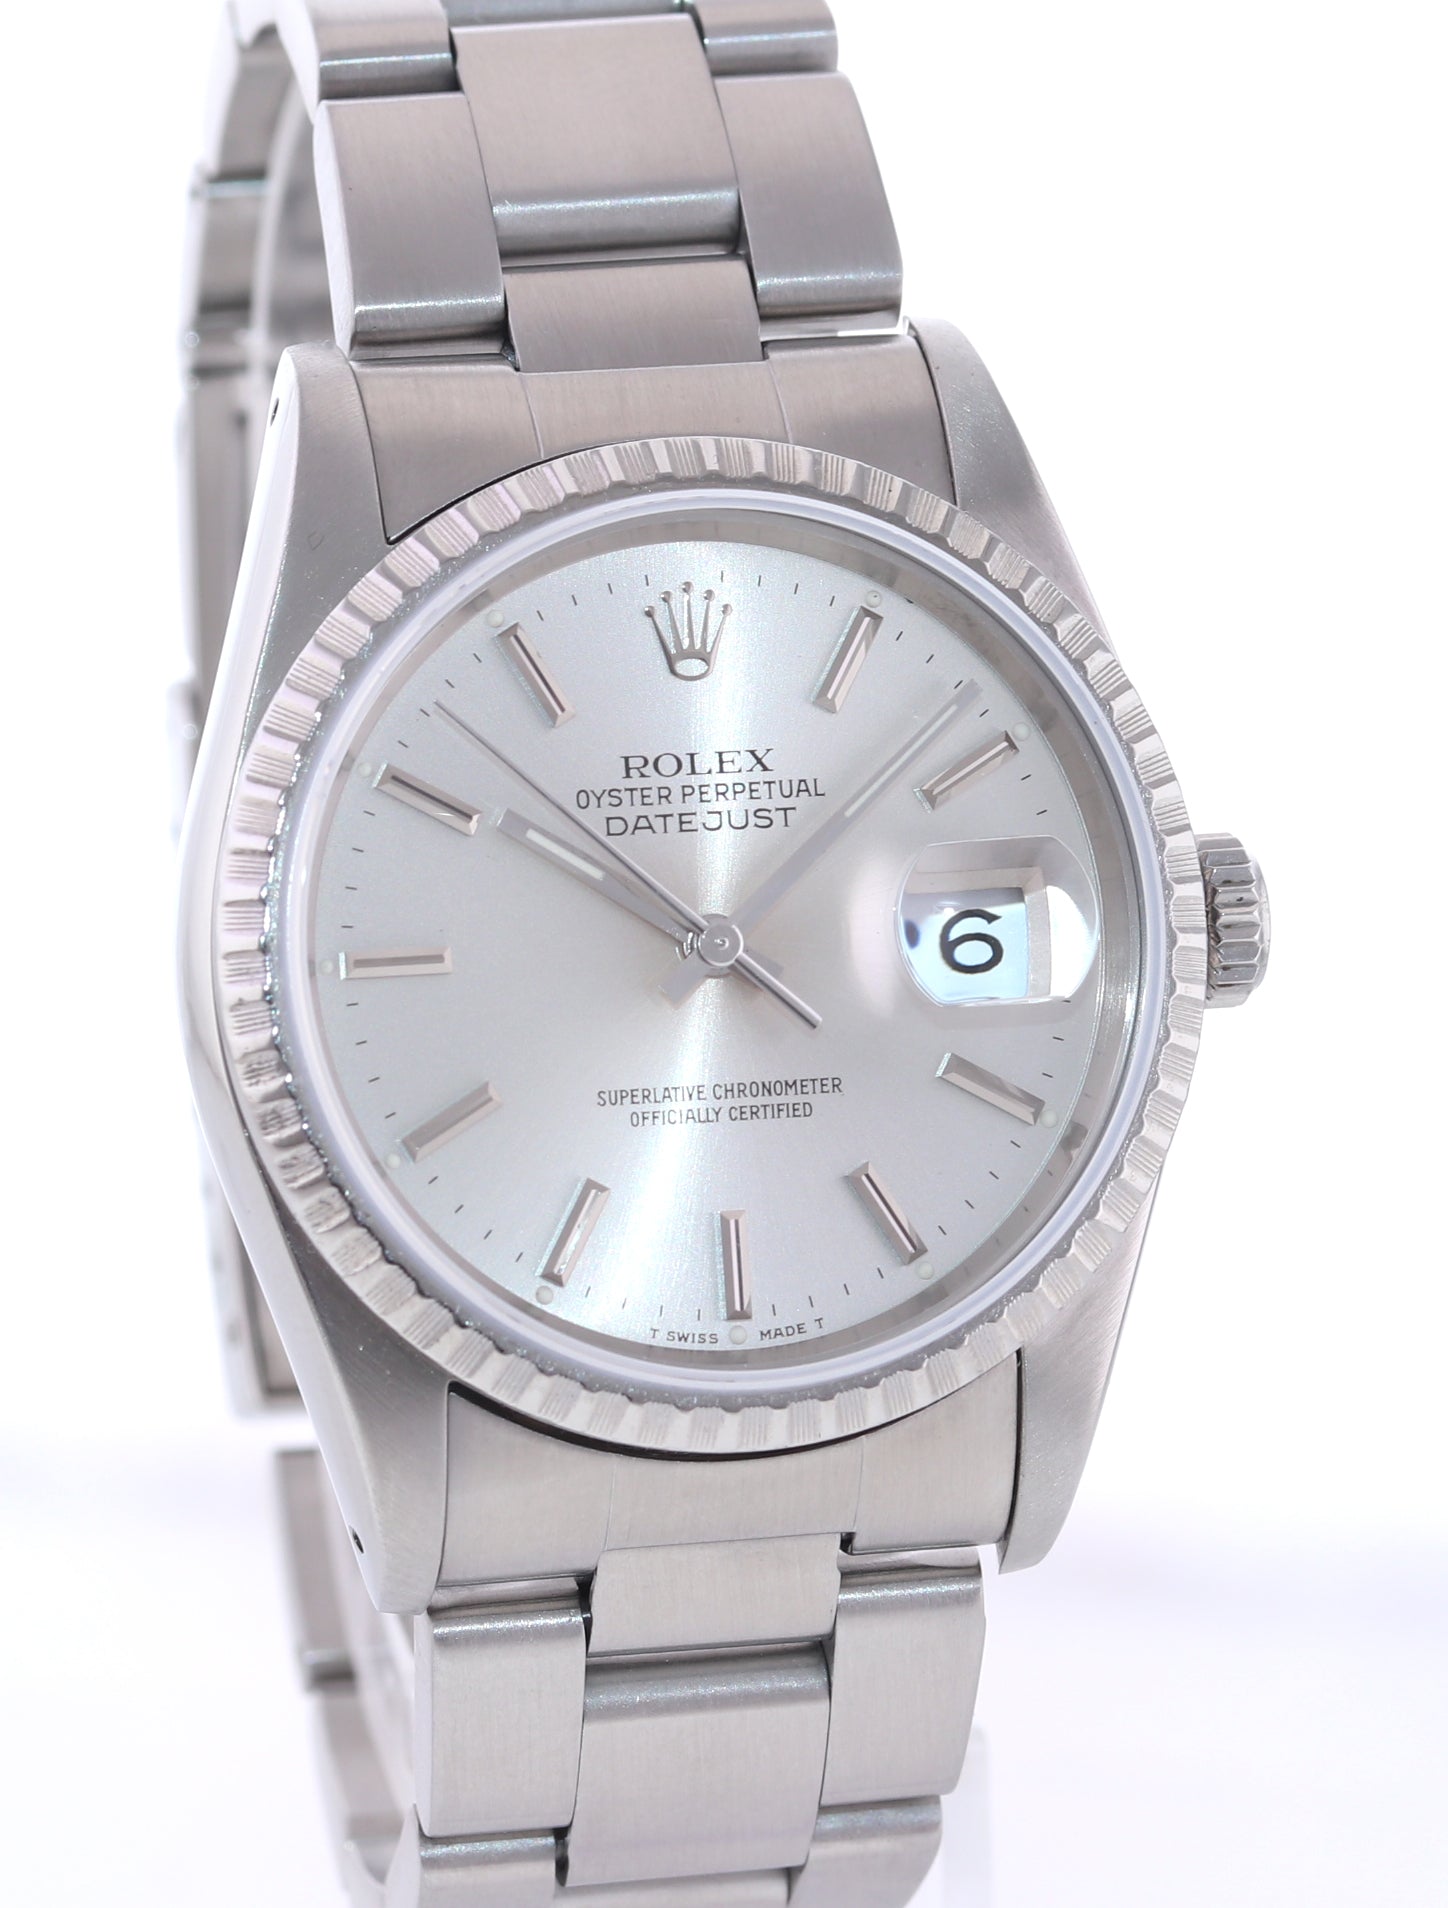 PAPERS Rolex DateJust 36mm 16220 Steel Silver Stick Oyster Watch Box